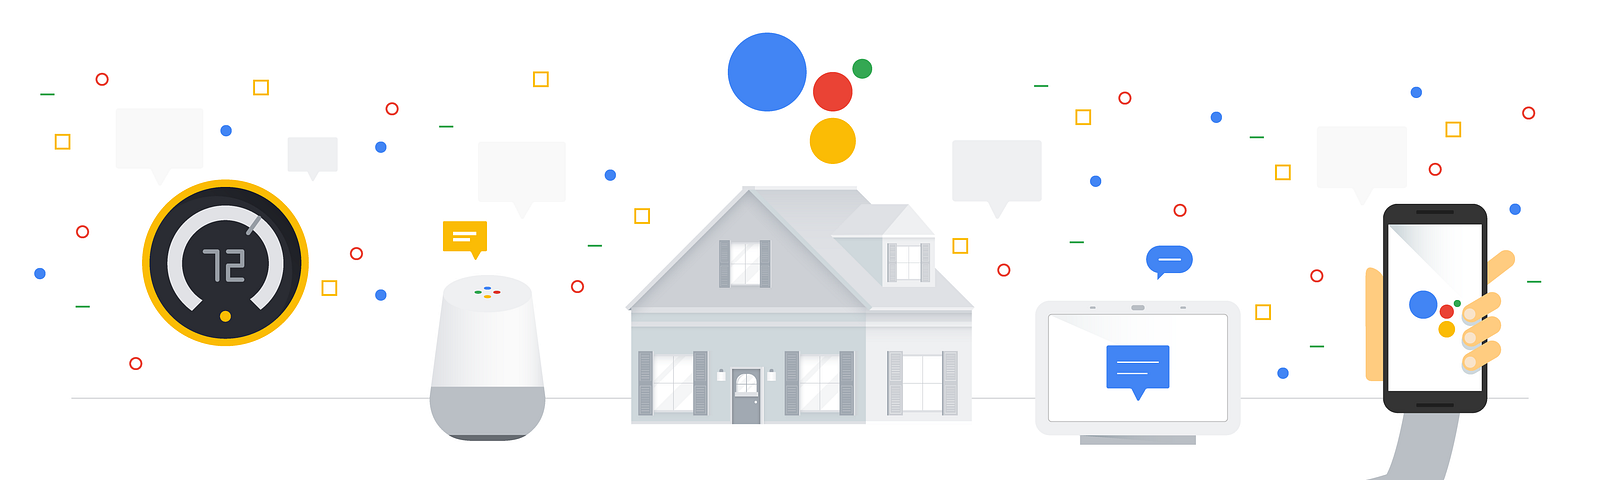 Illustration of a home with the Smart Home technology and other tech symbols.